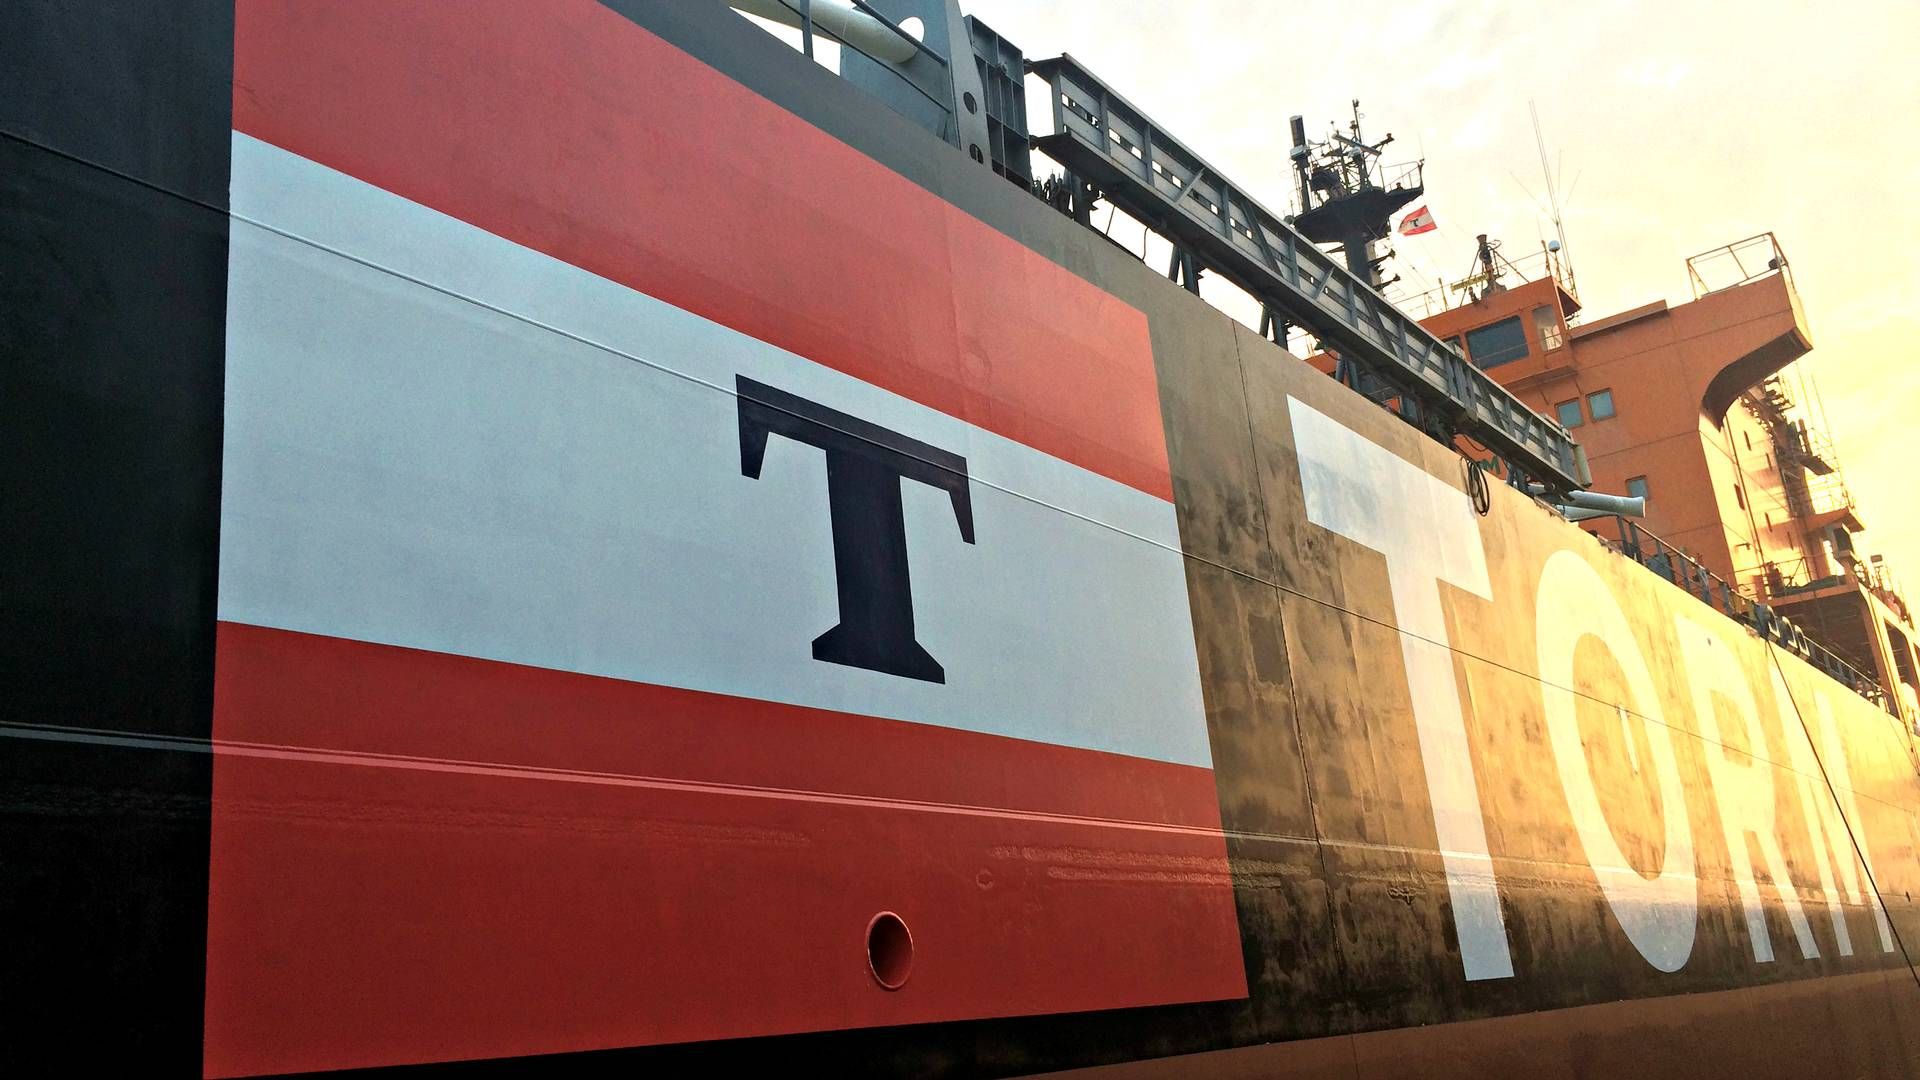 The three recruitment agencies Faststream, Helm, and Salling Search have thrown themselves into the task of filling vacant jobs in the shipping industry in Denmark. | Photo: Pr / Torm